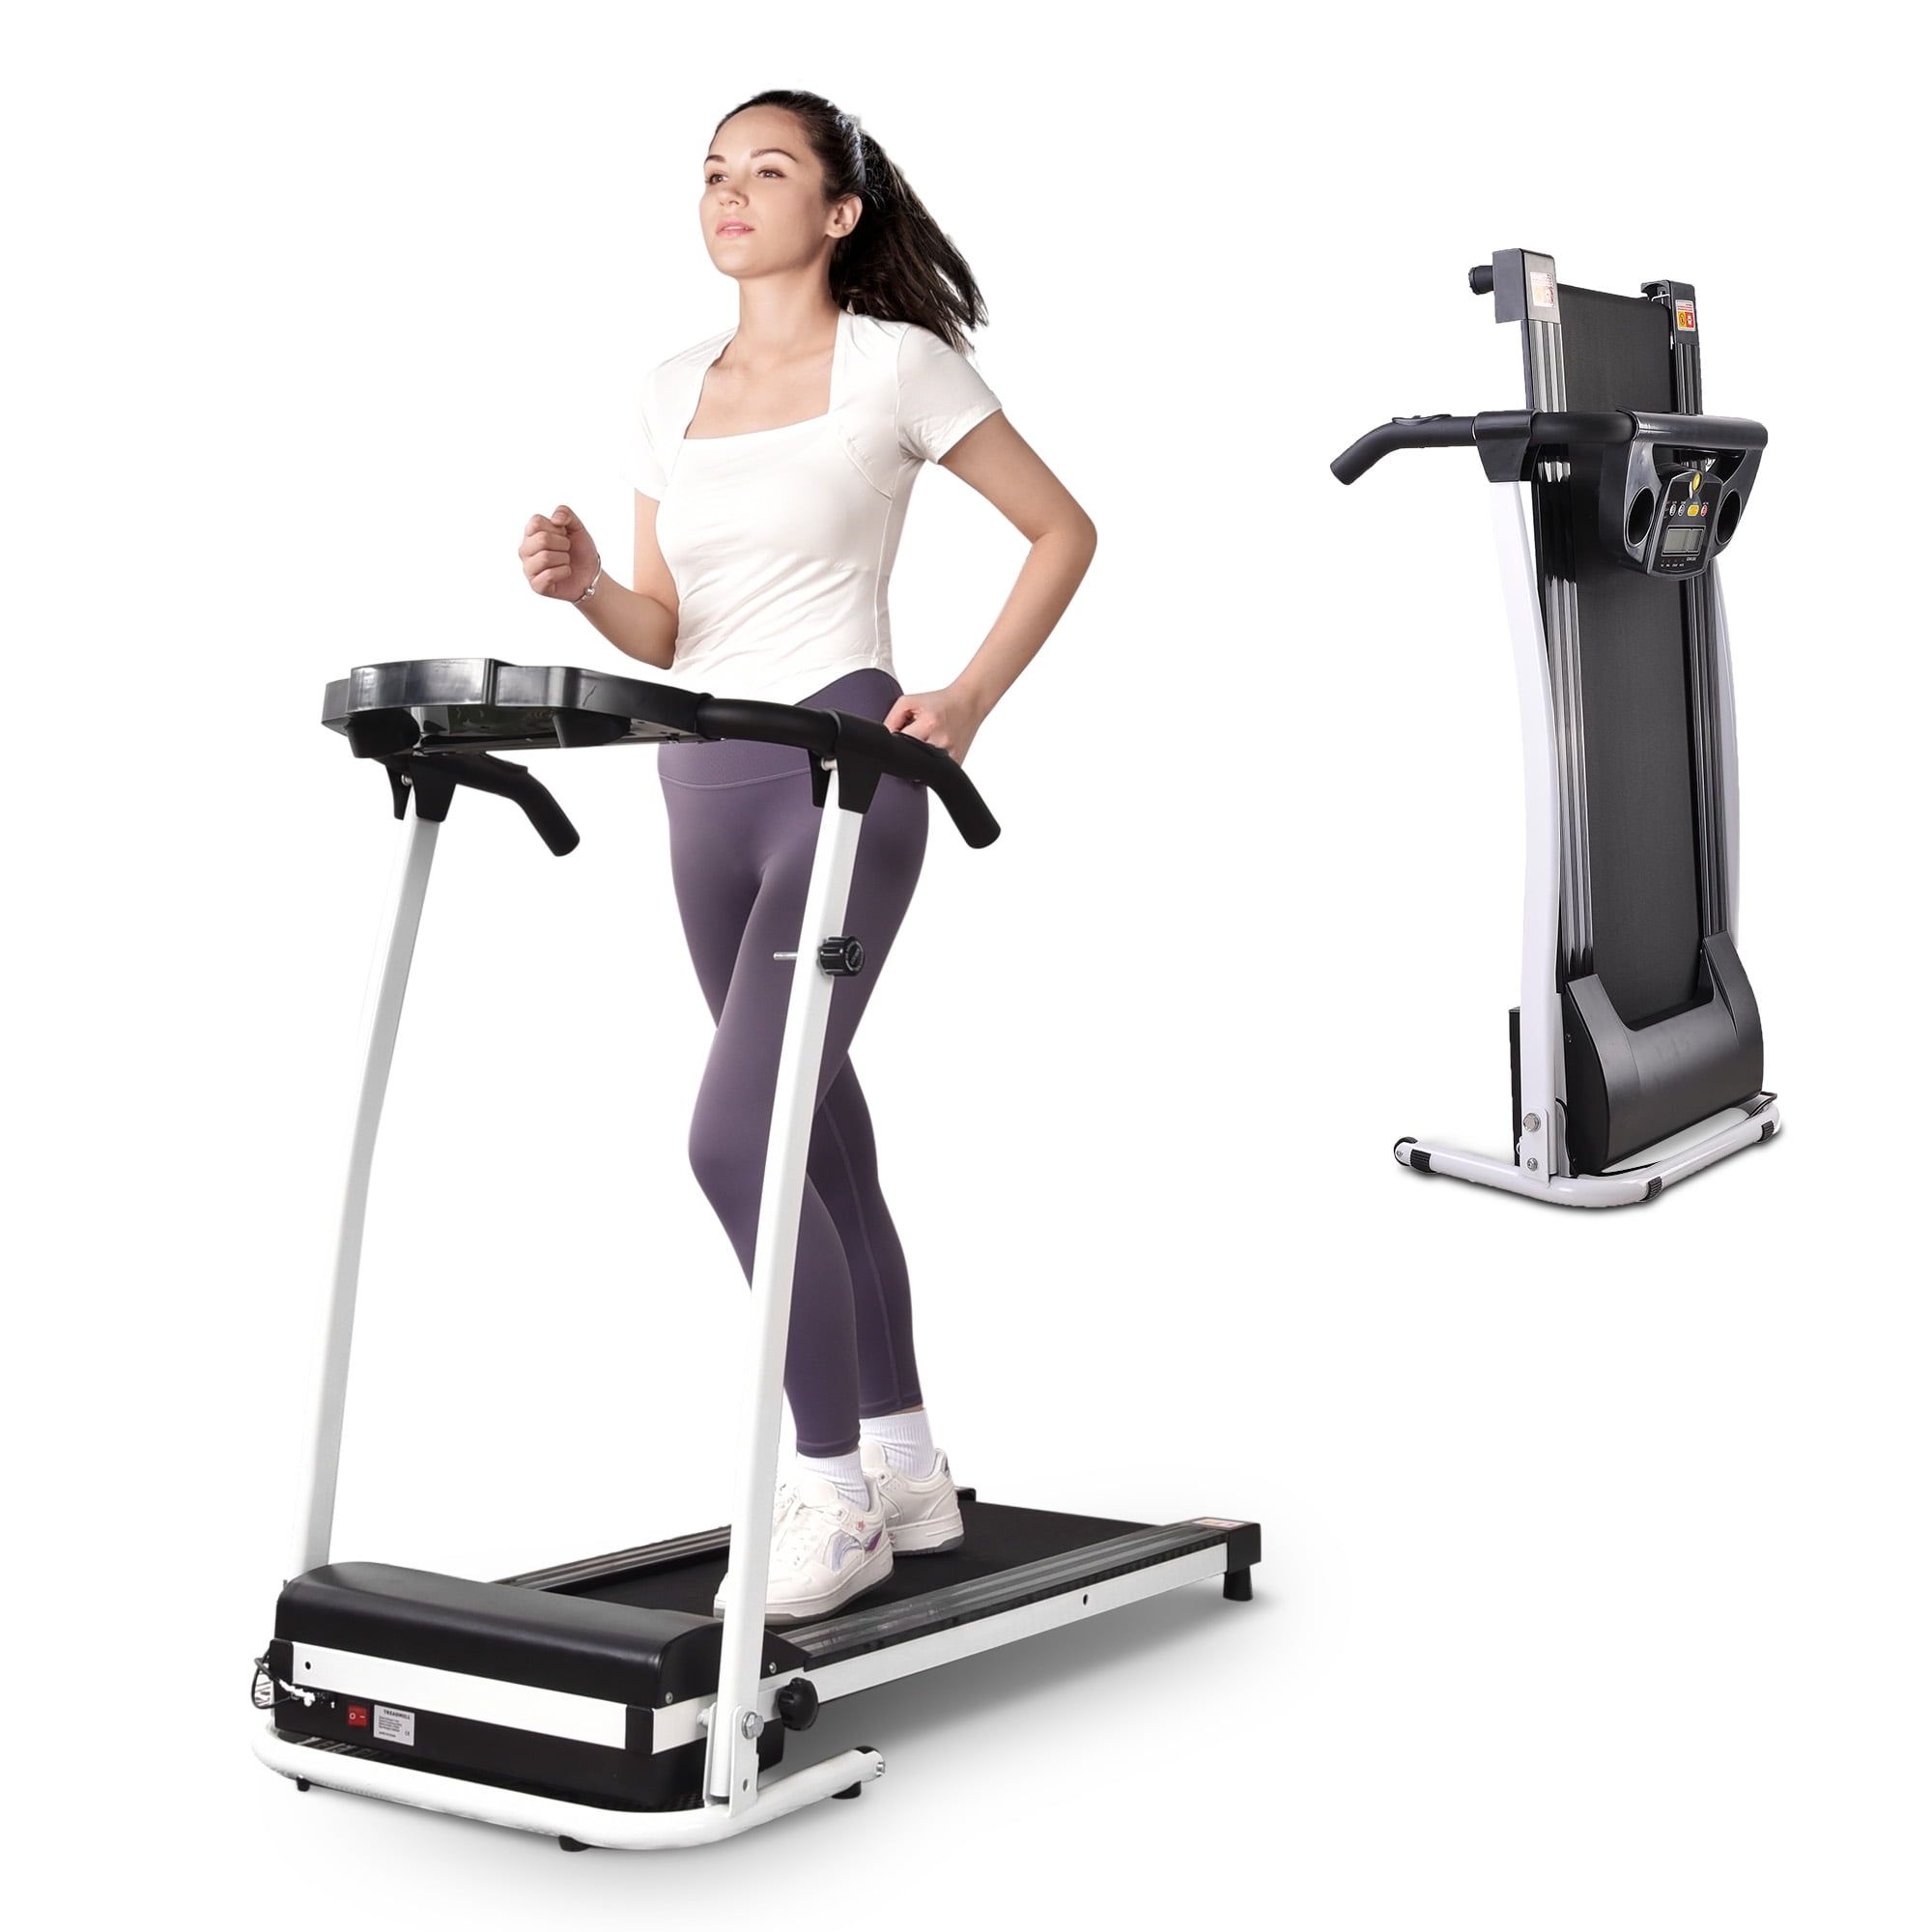 Details about   Folding Treadmill Electric Motorized Power Running Jogging Fitness Machine USA 